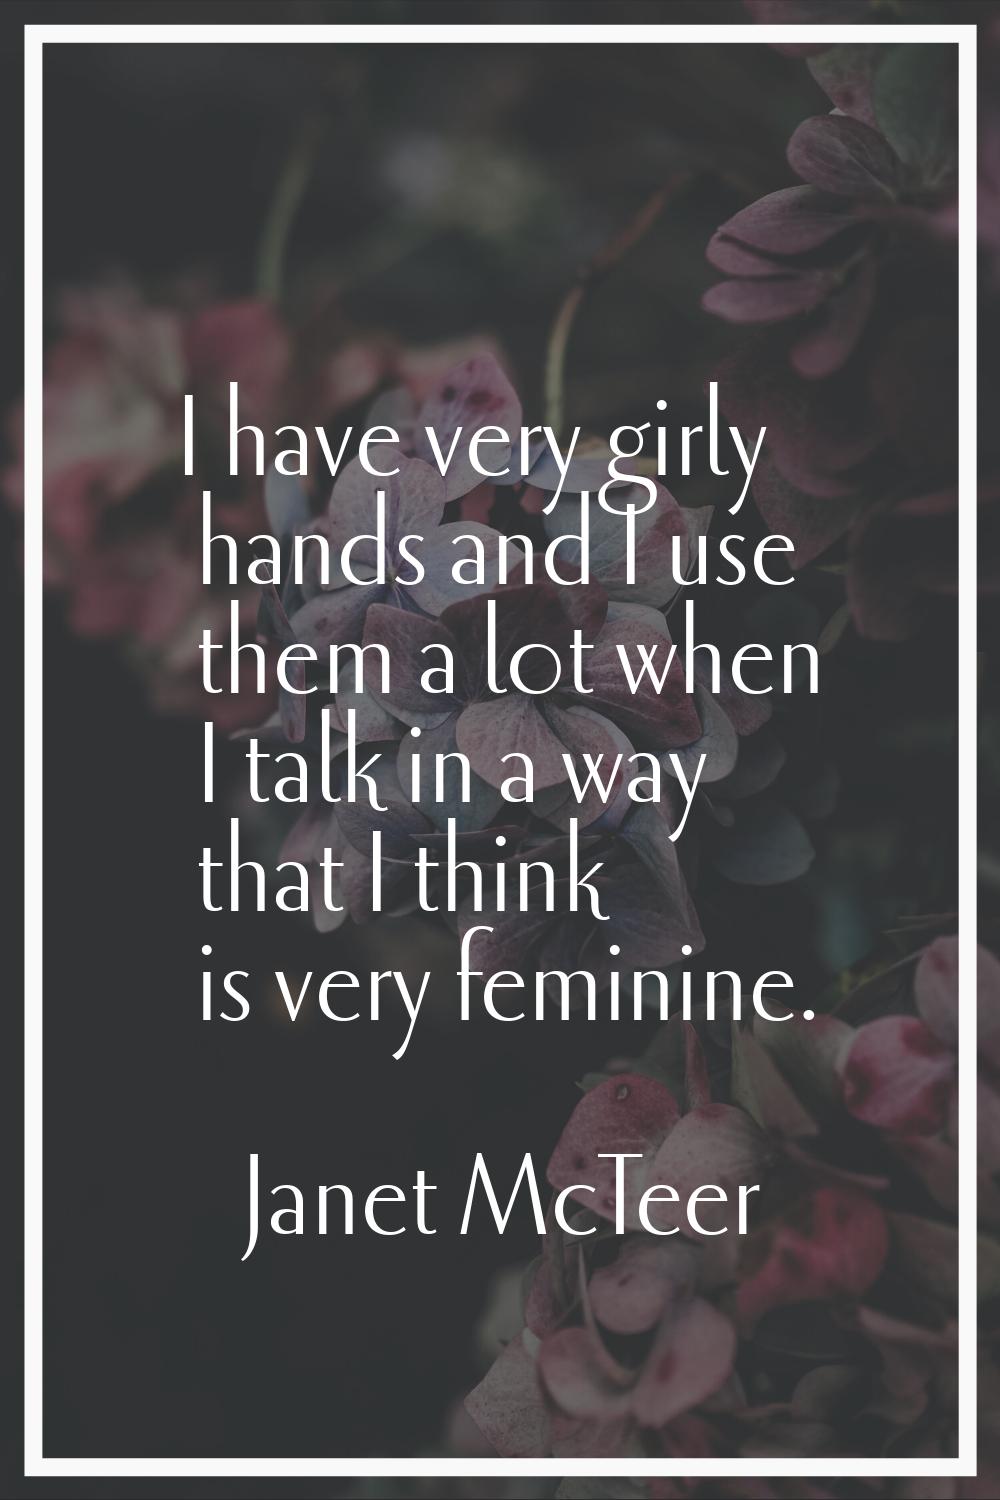 I have very girly hands and I use them a lot when I talk in a way that I think is very feminine.